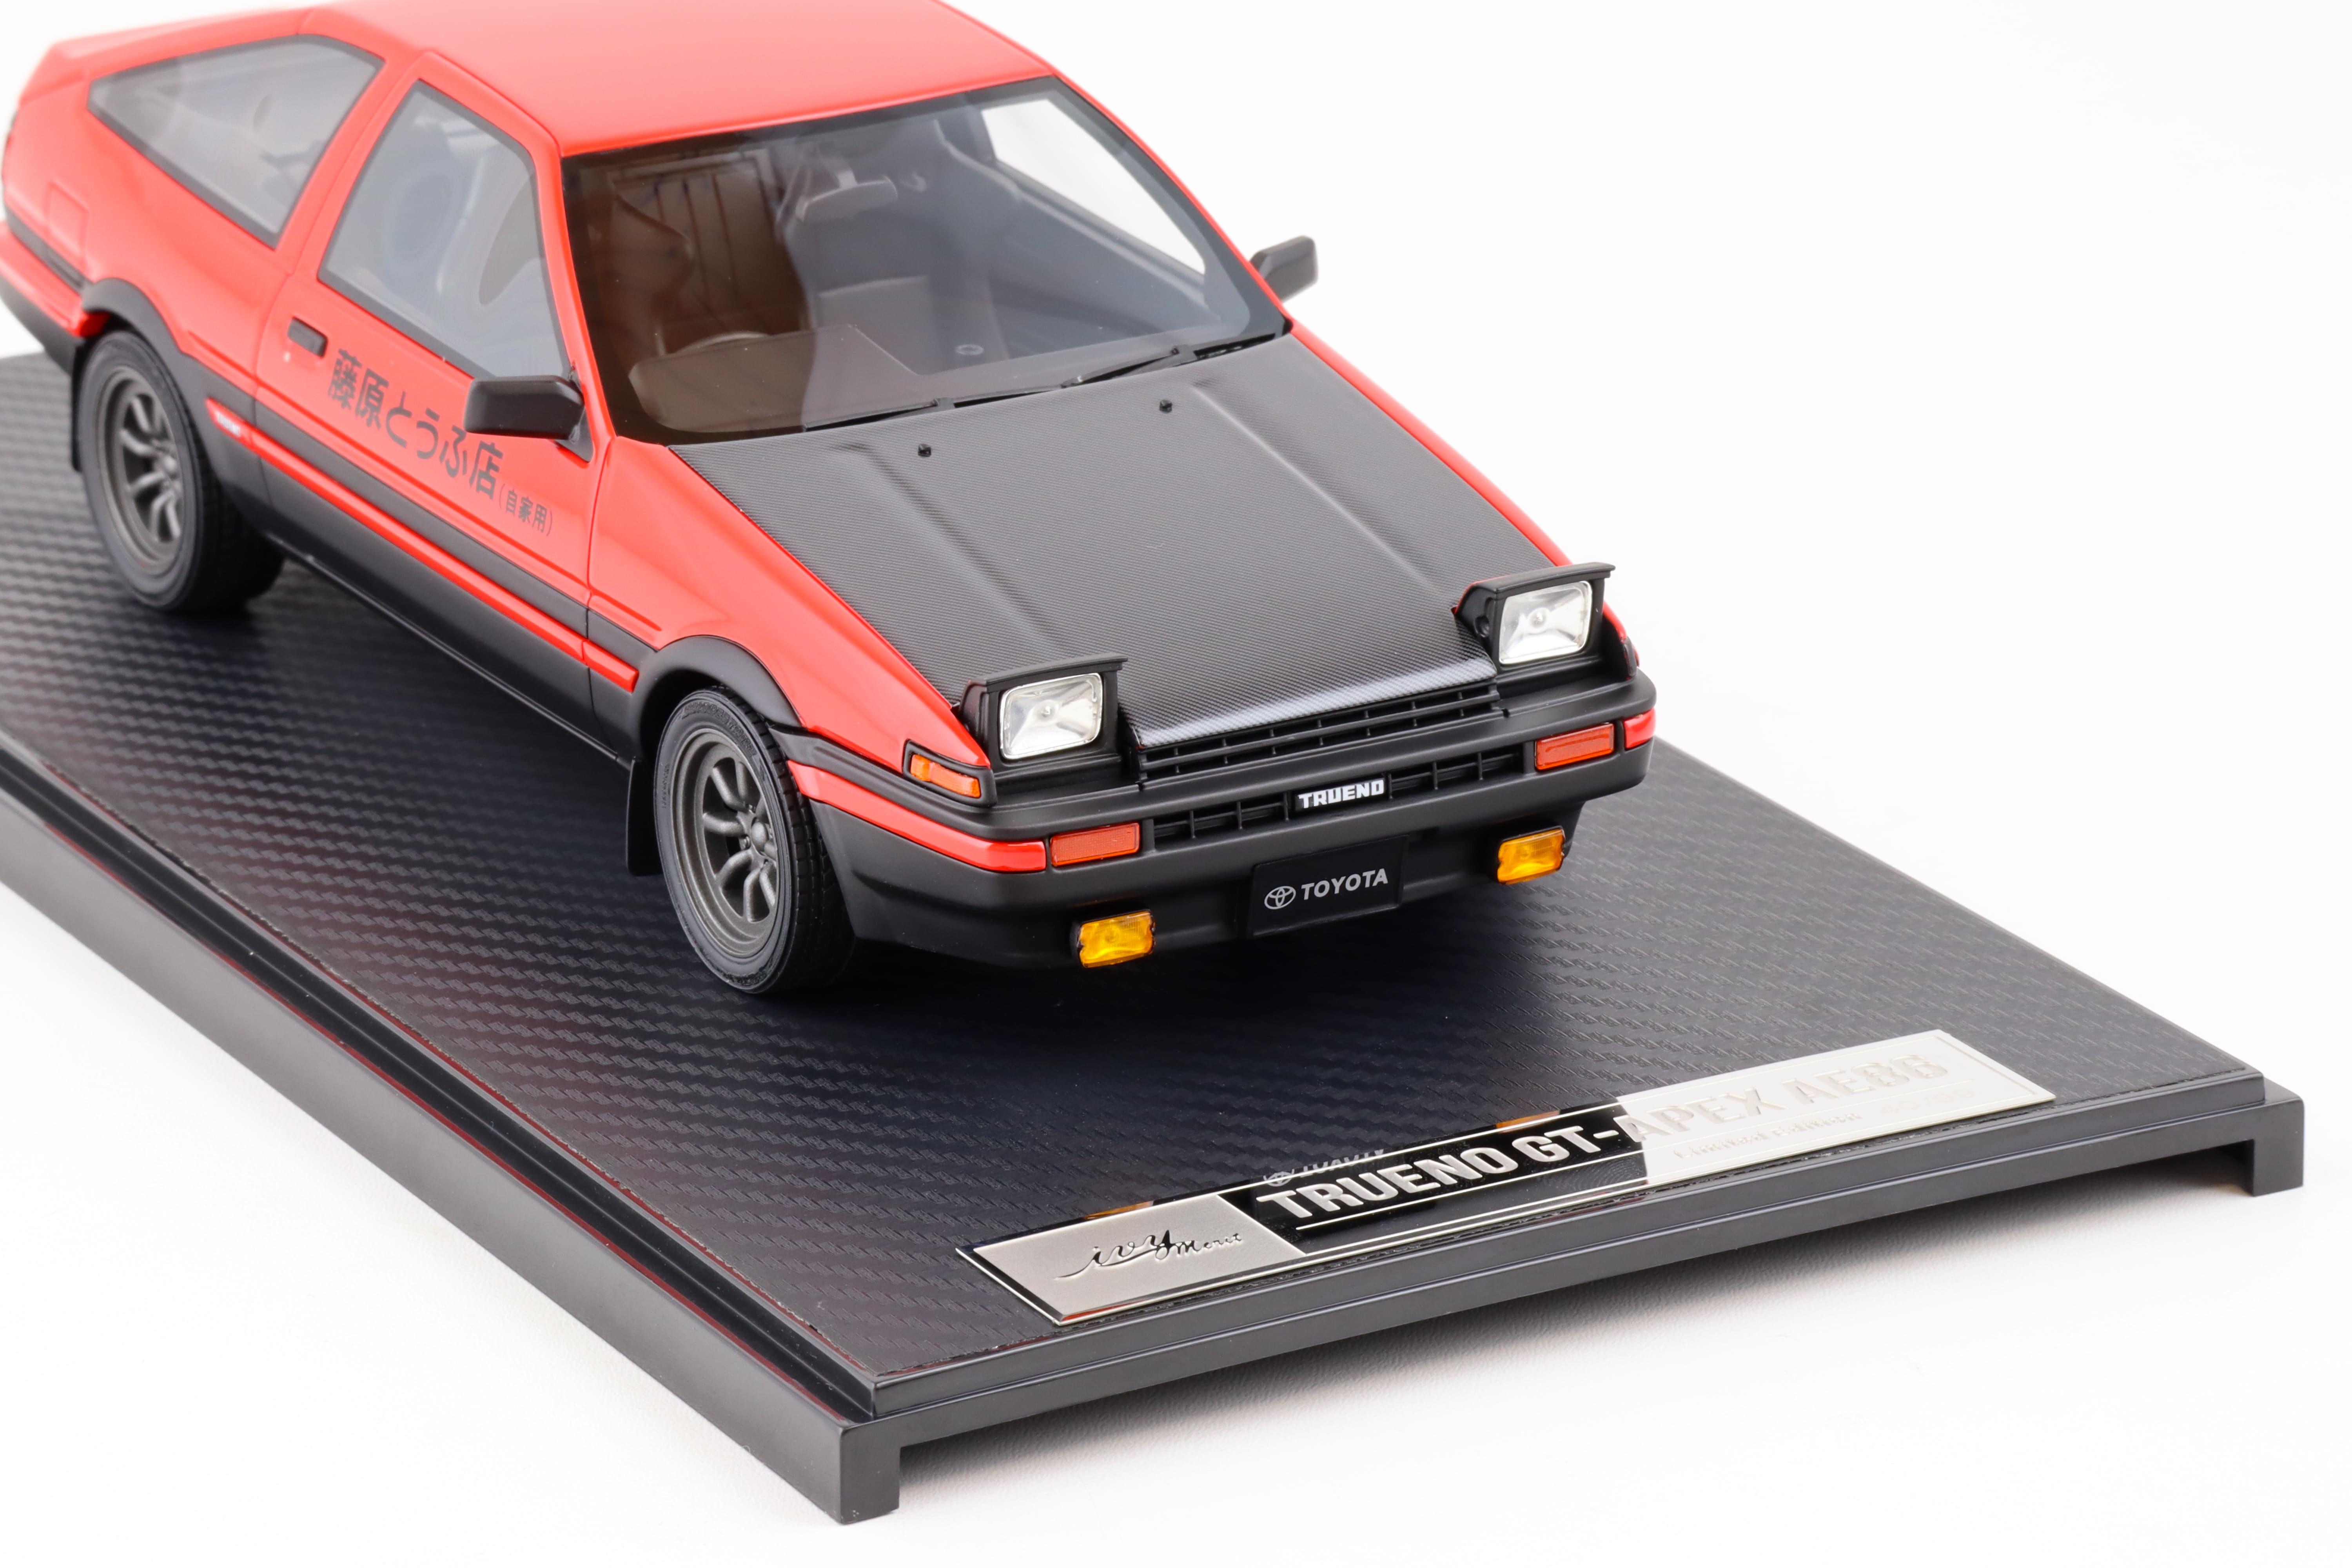 1:18 Ivy Model Merit Toyota Trueno GT-APEX AE86 red with Carbon hood - Limited 99 pcs.